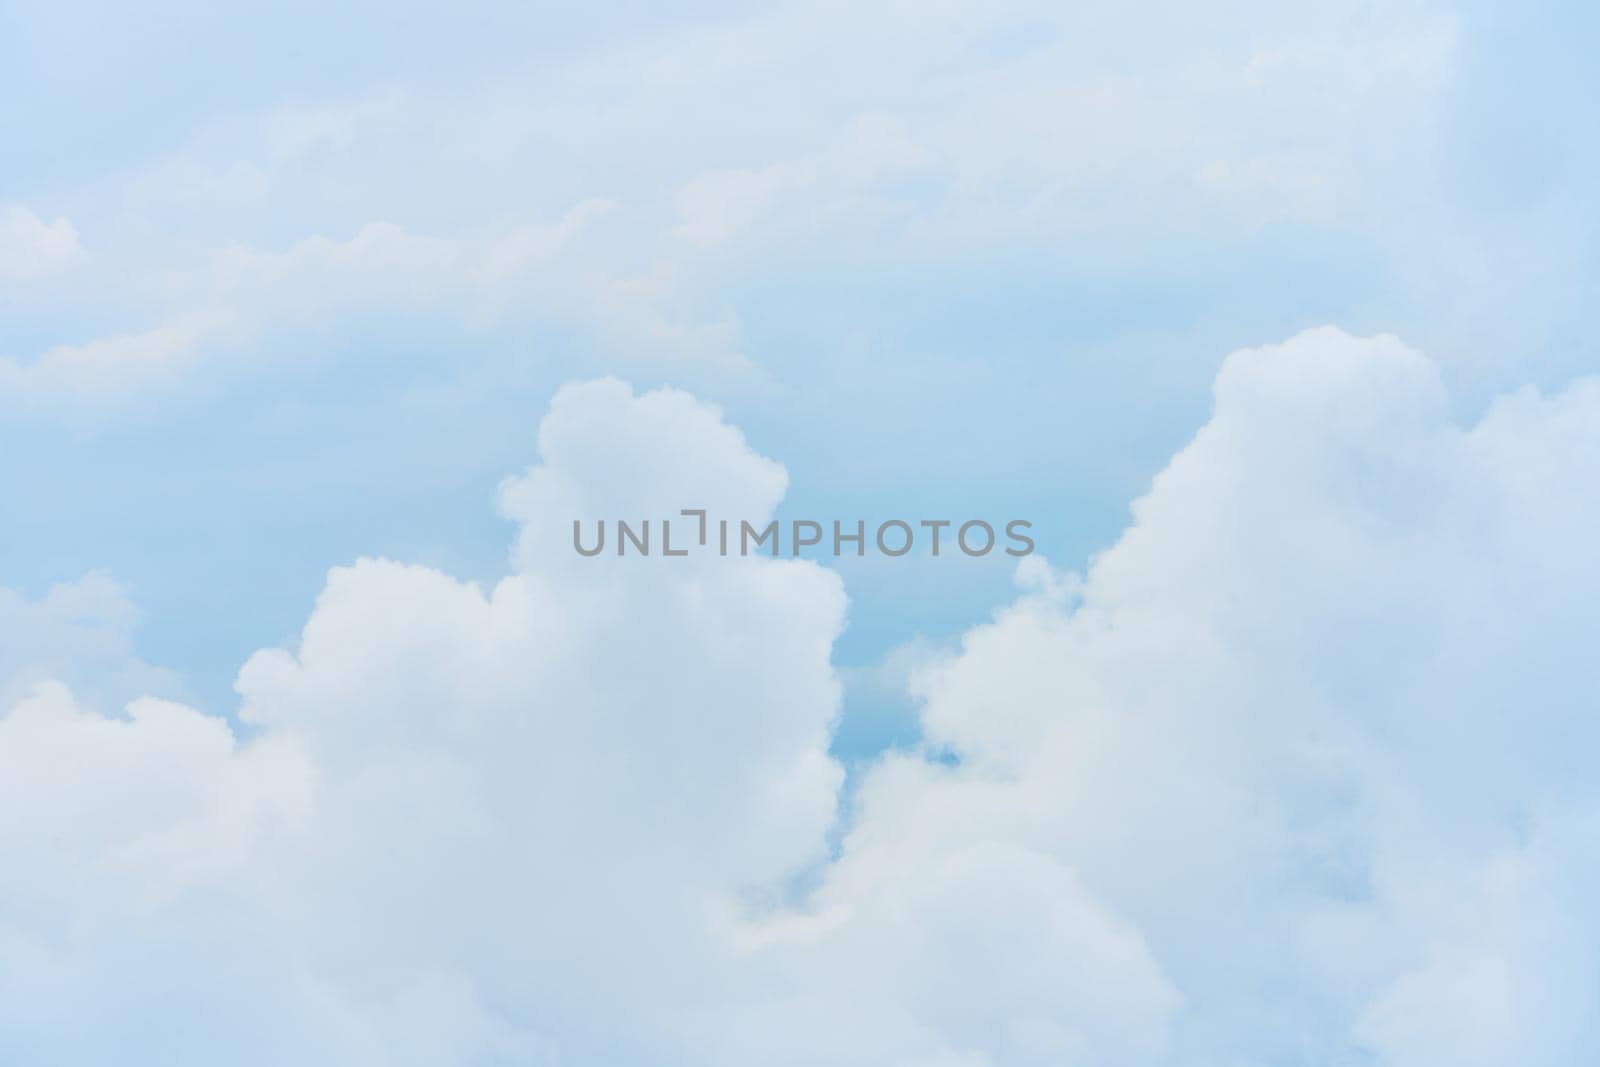 Landscape of fluffy white clouds on a dark blue sky. View from the plane at high altitude by Try_my_best